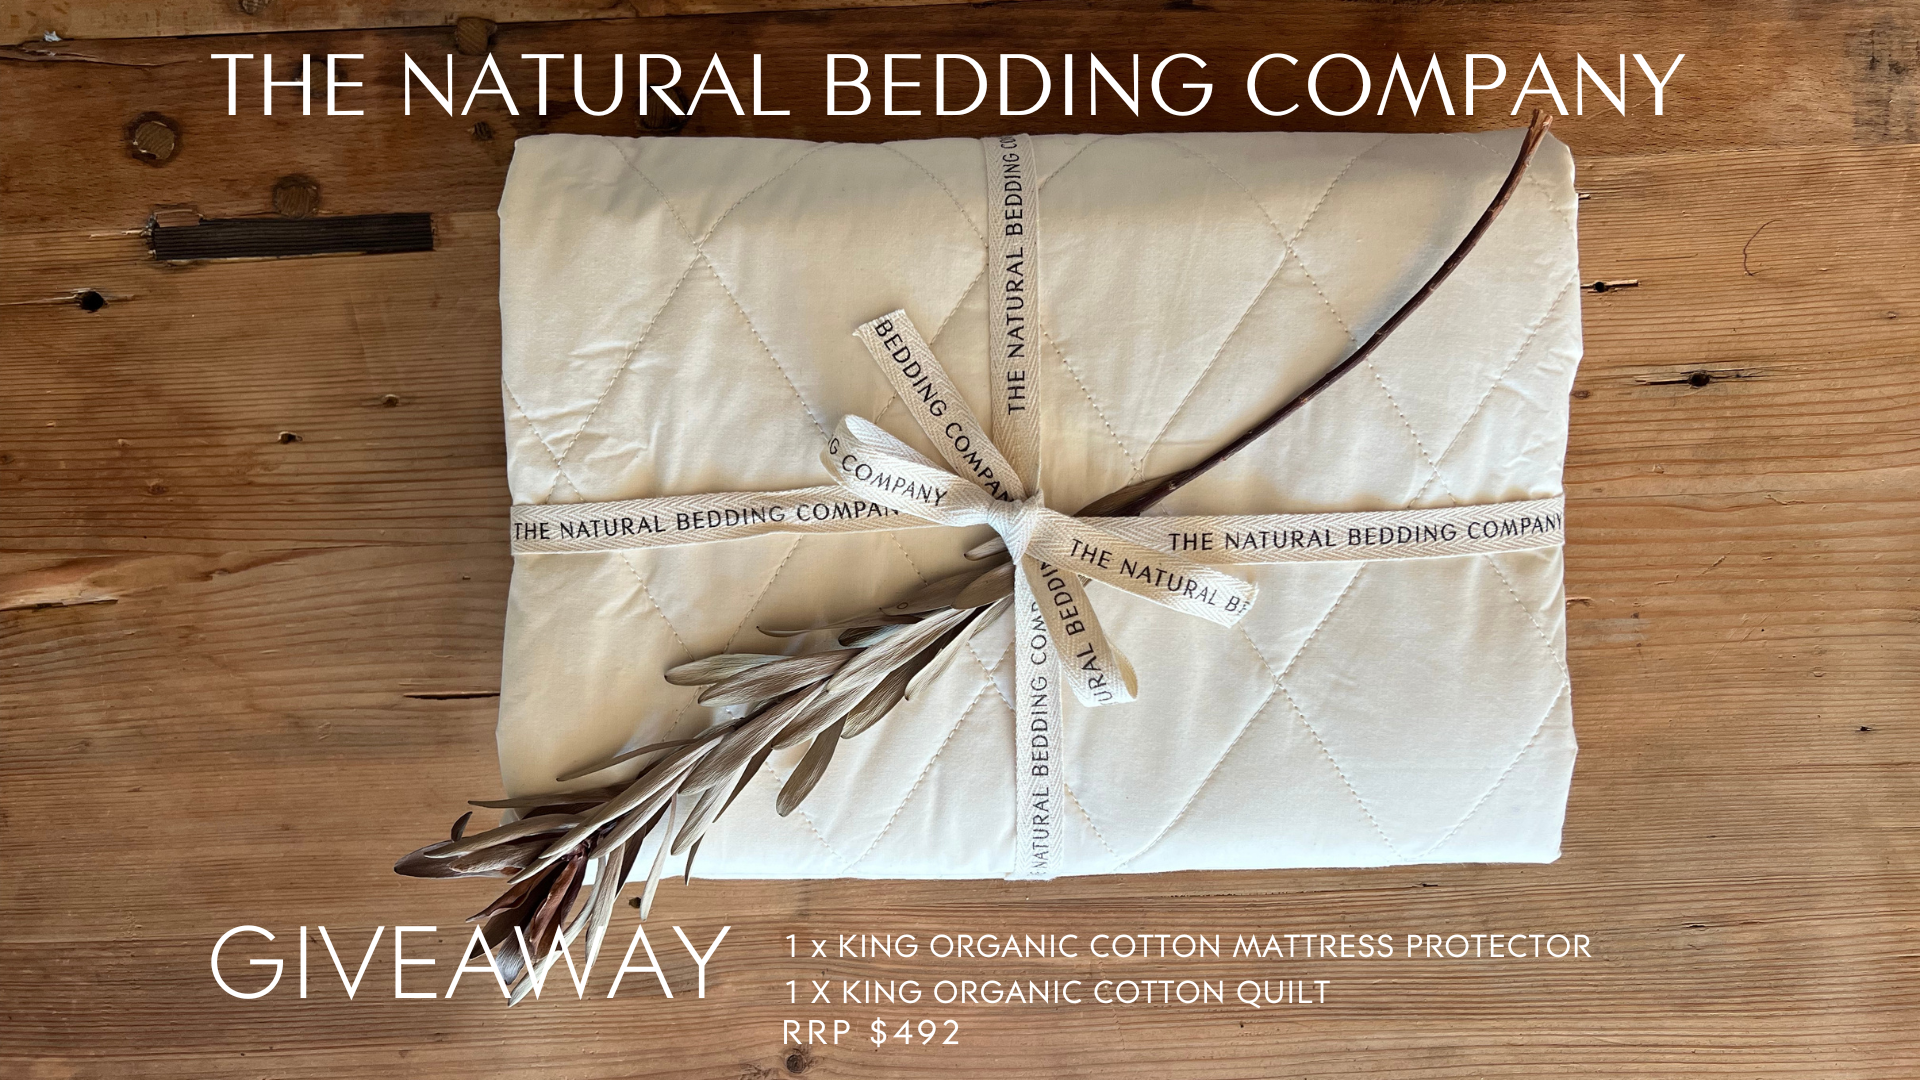 WIN a $492 Bundle from The Natural Bedding Company